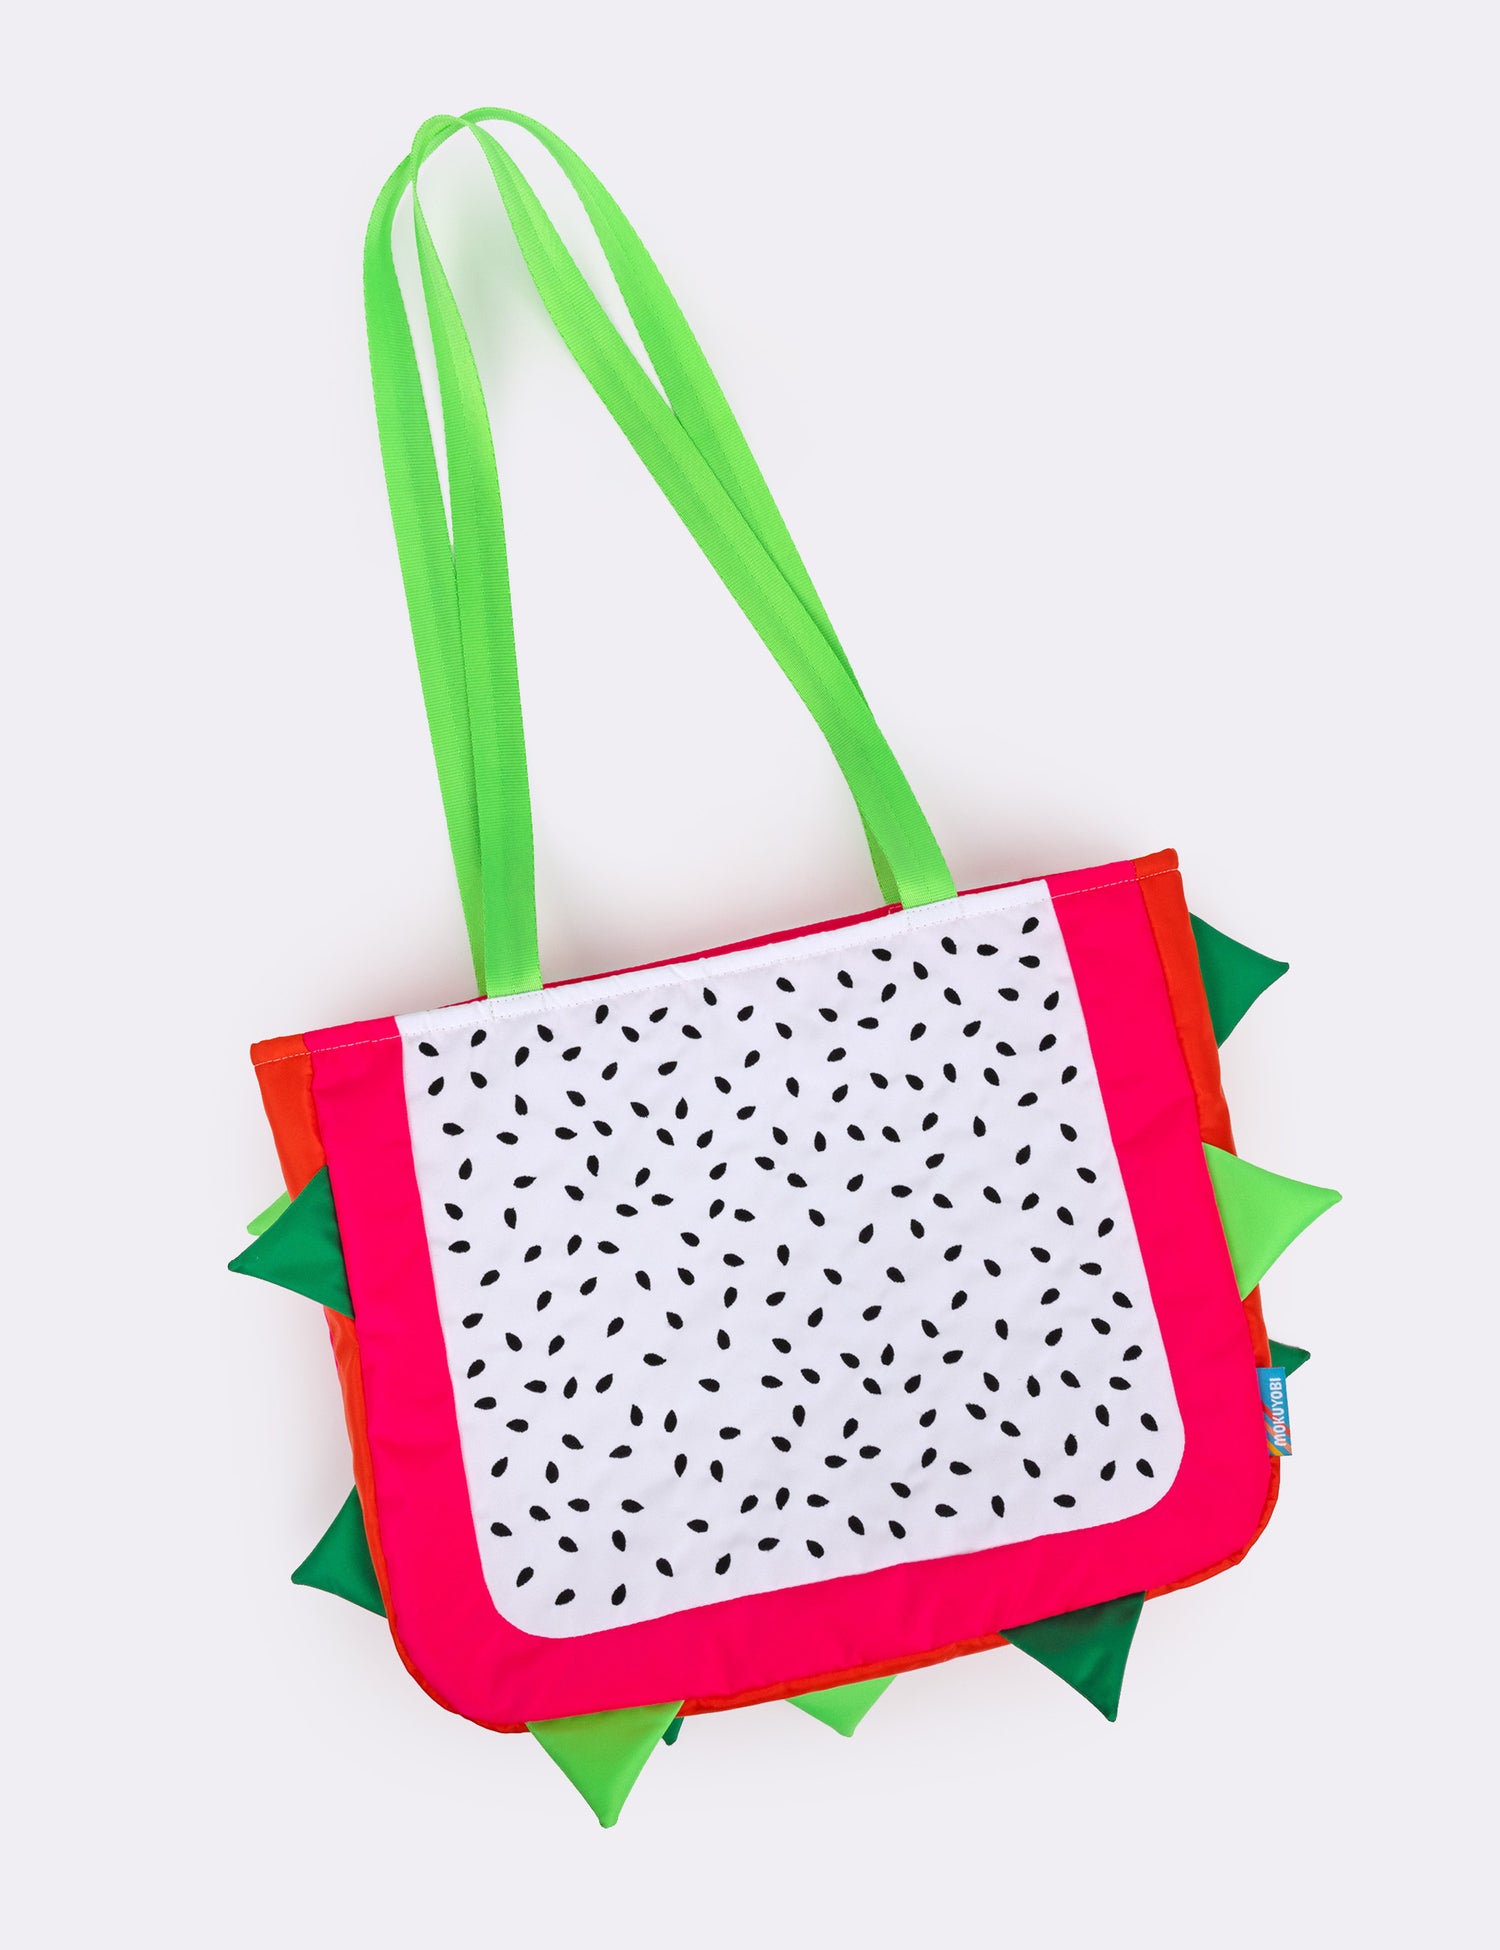 Entire picture of a tote bag in the shape of a dragon fruit